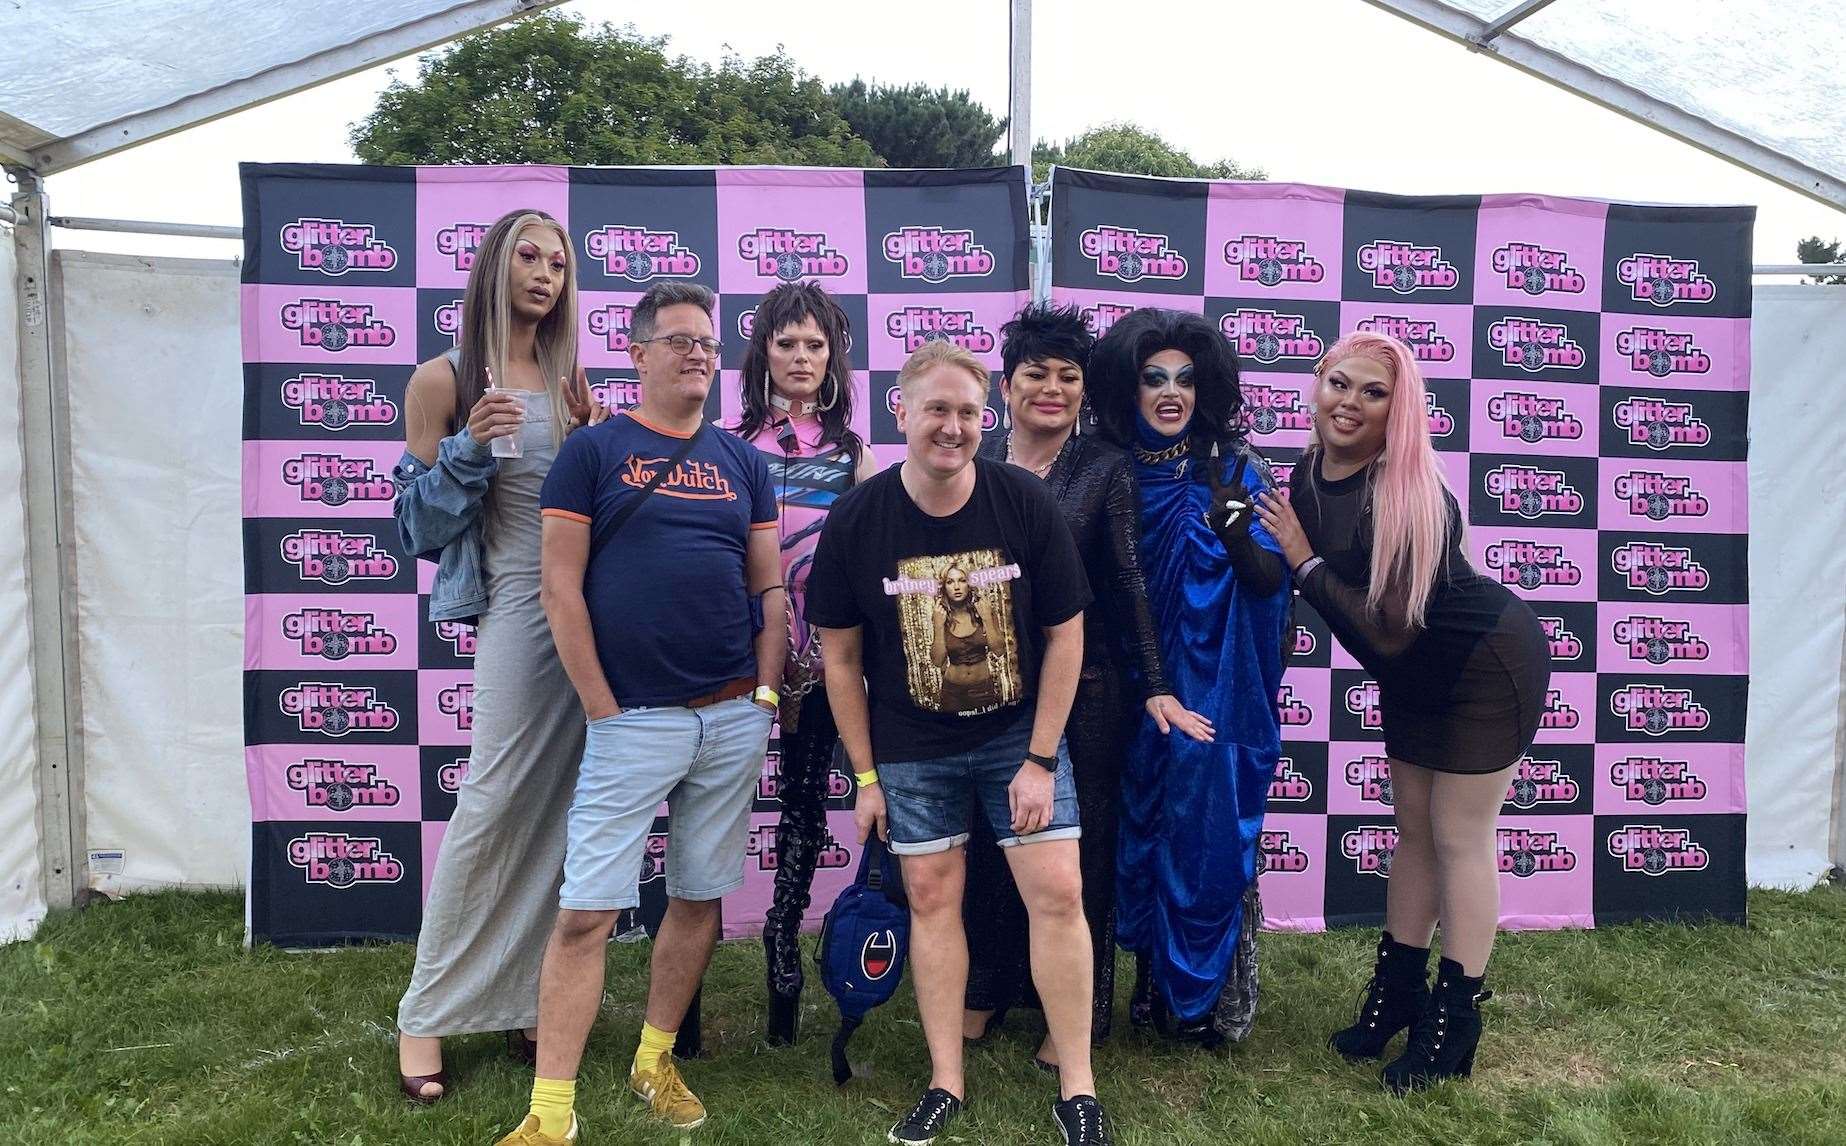 Adam Fork travelled from Brighton to meet the stars of RuPaul's Drag Race UK